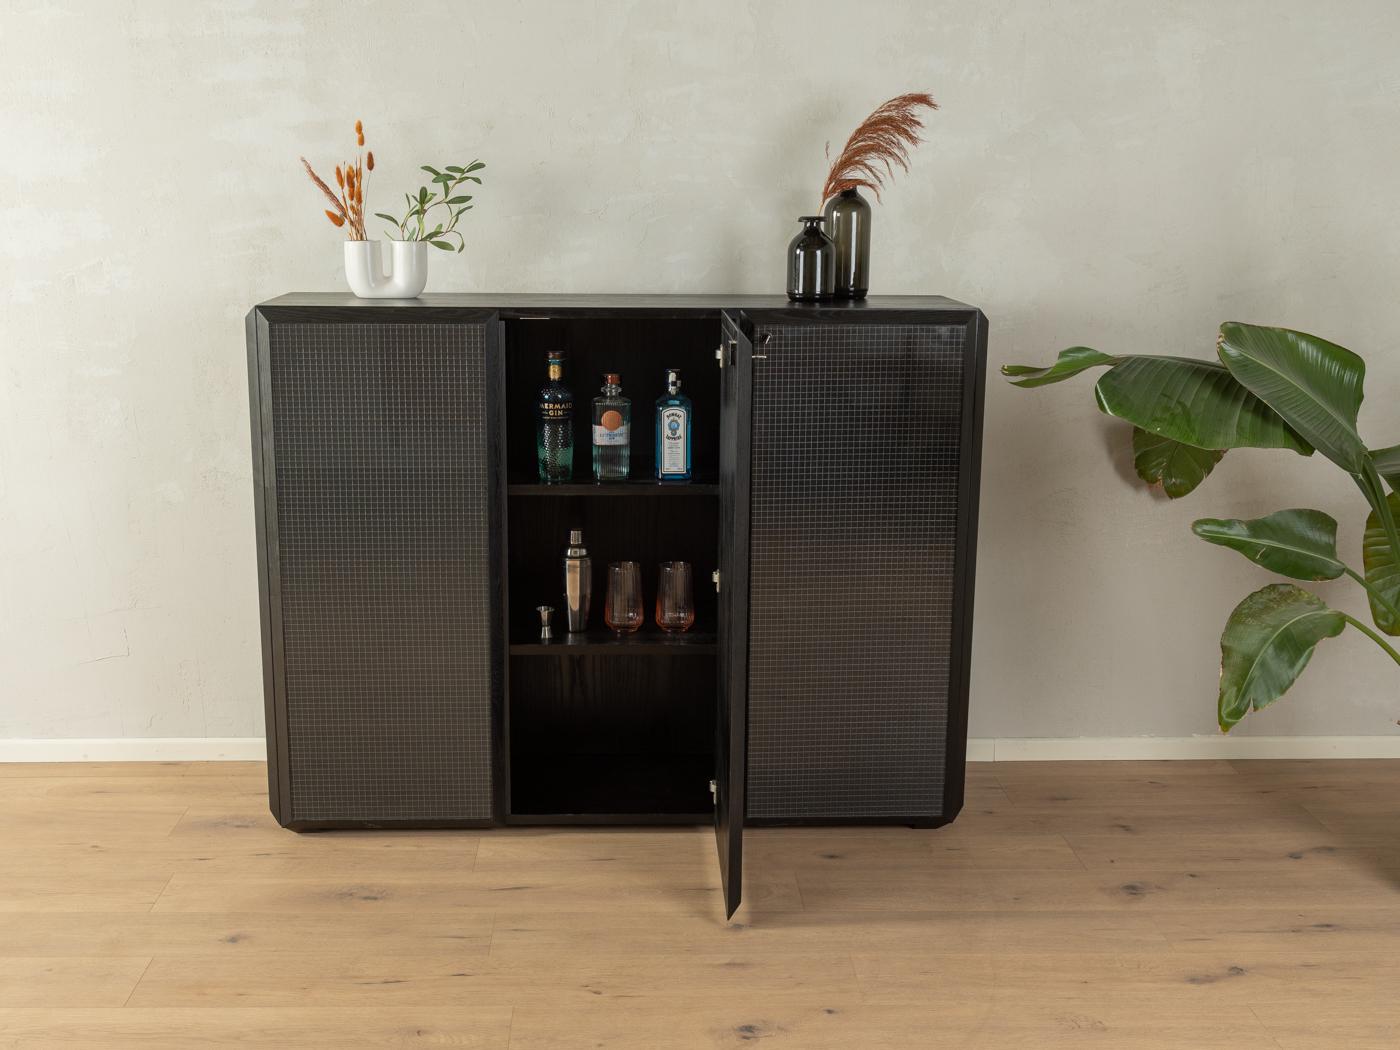 Talete Highboard by Pierluigi Ghianda and Gabriele Regondi for Rosenthal from the 1980s. High-quality solid wood corpus made of black stained ash with three doors with glass plates and four shelves.

Quality Features:
 very good workmanship
